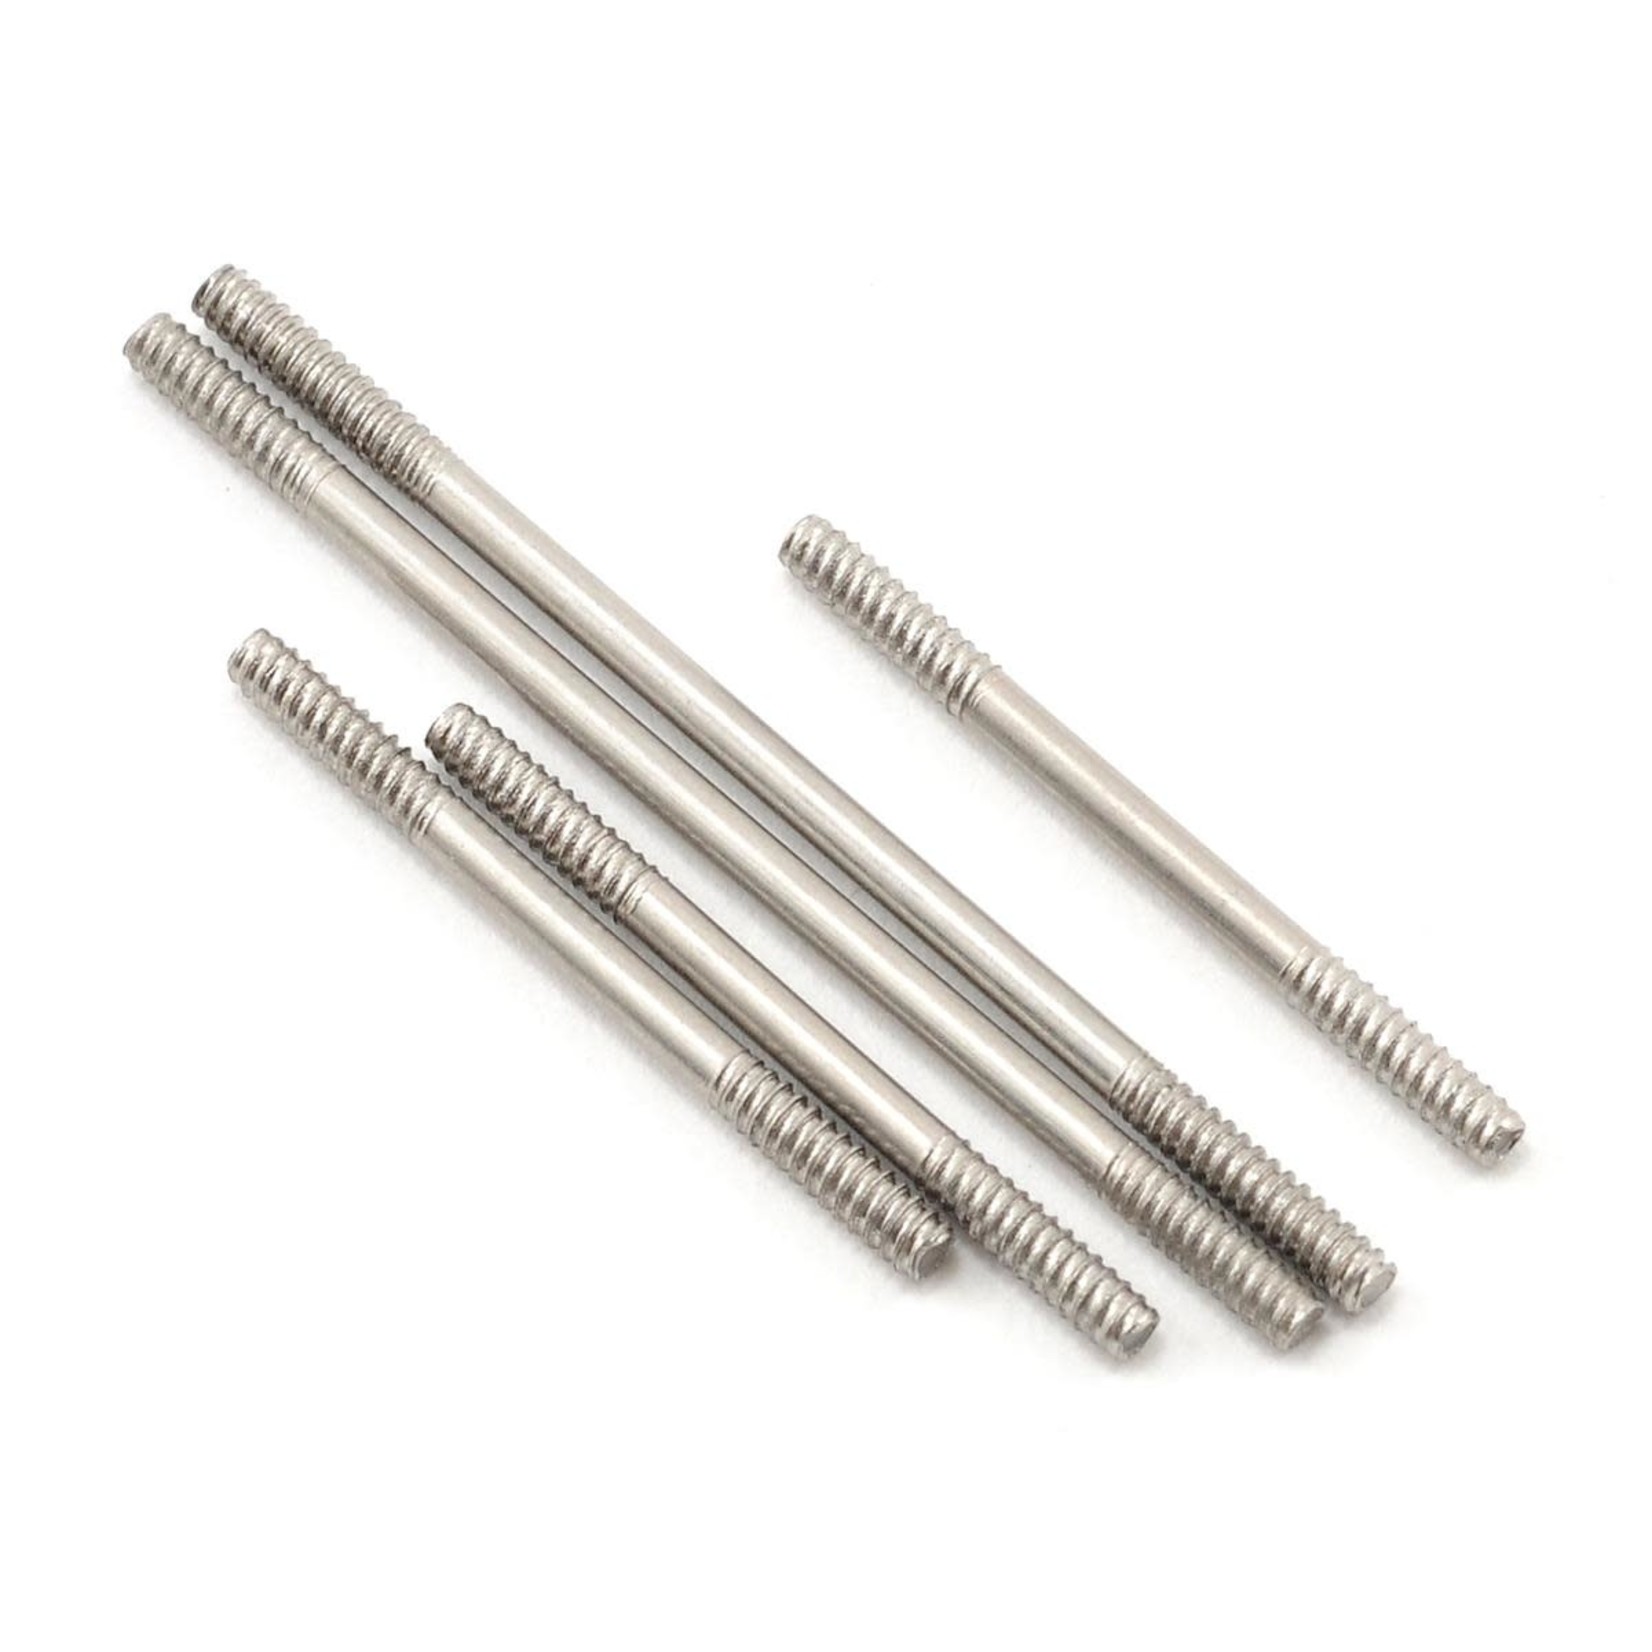 Align AGNH45047 Align T-Rex 450 Pro Stainless Steel Linkage Set